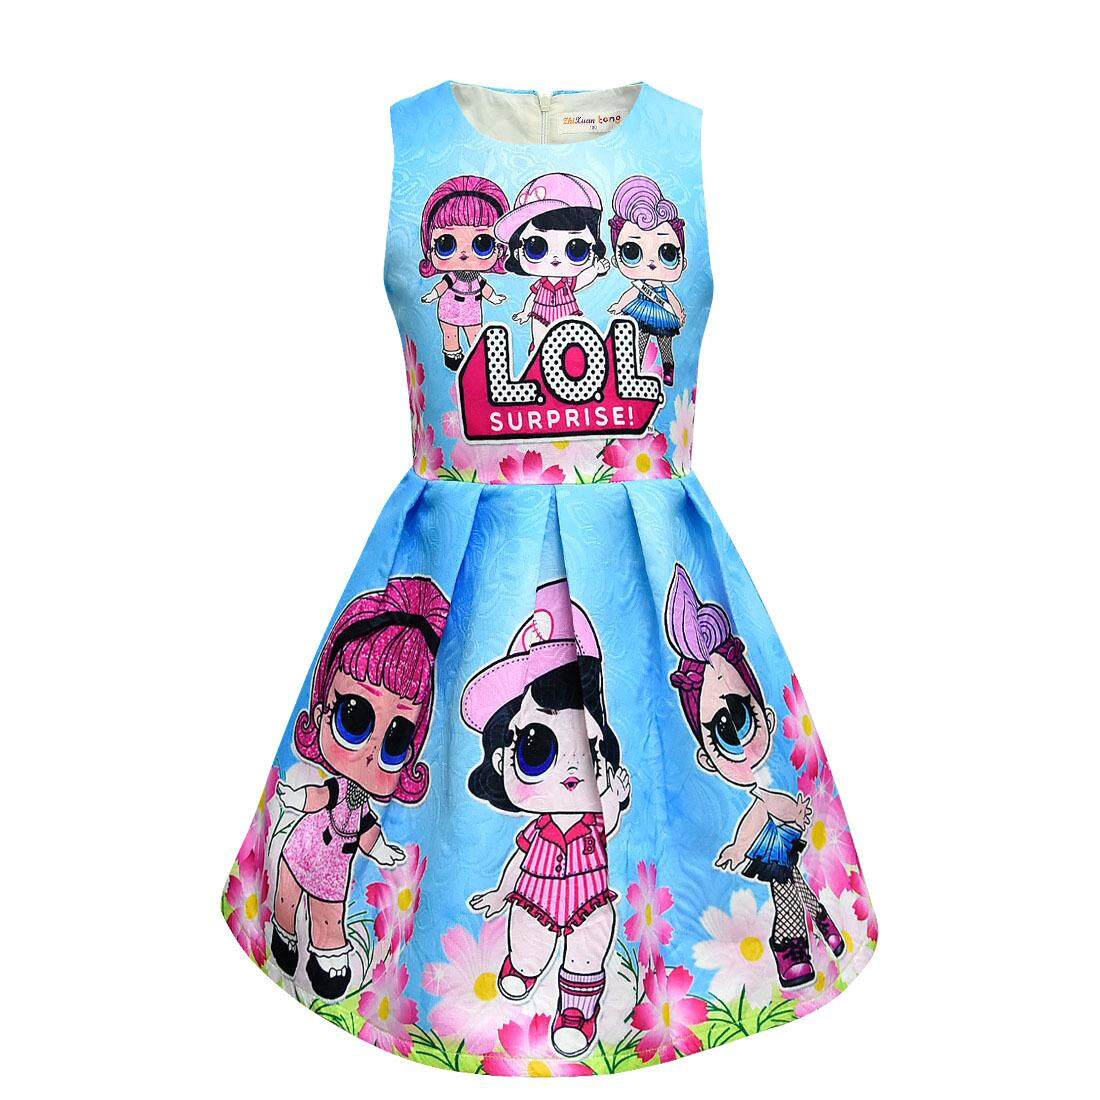 lol dolls for 10 year olds